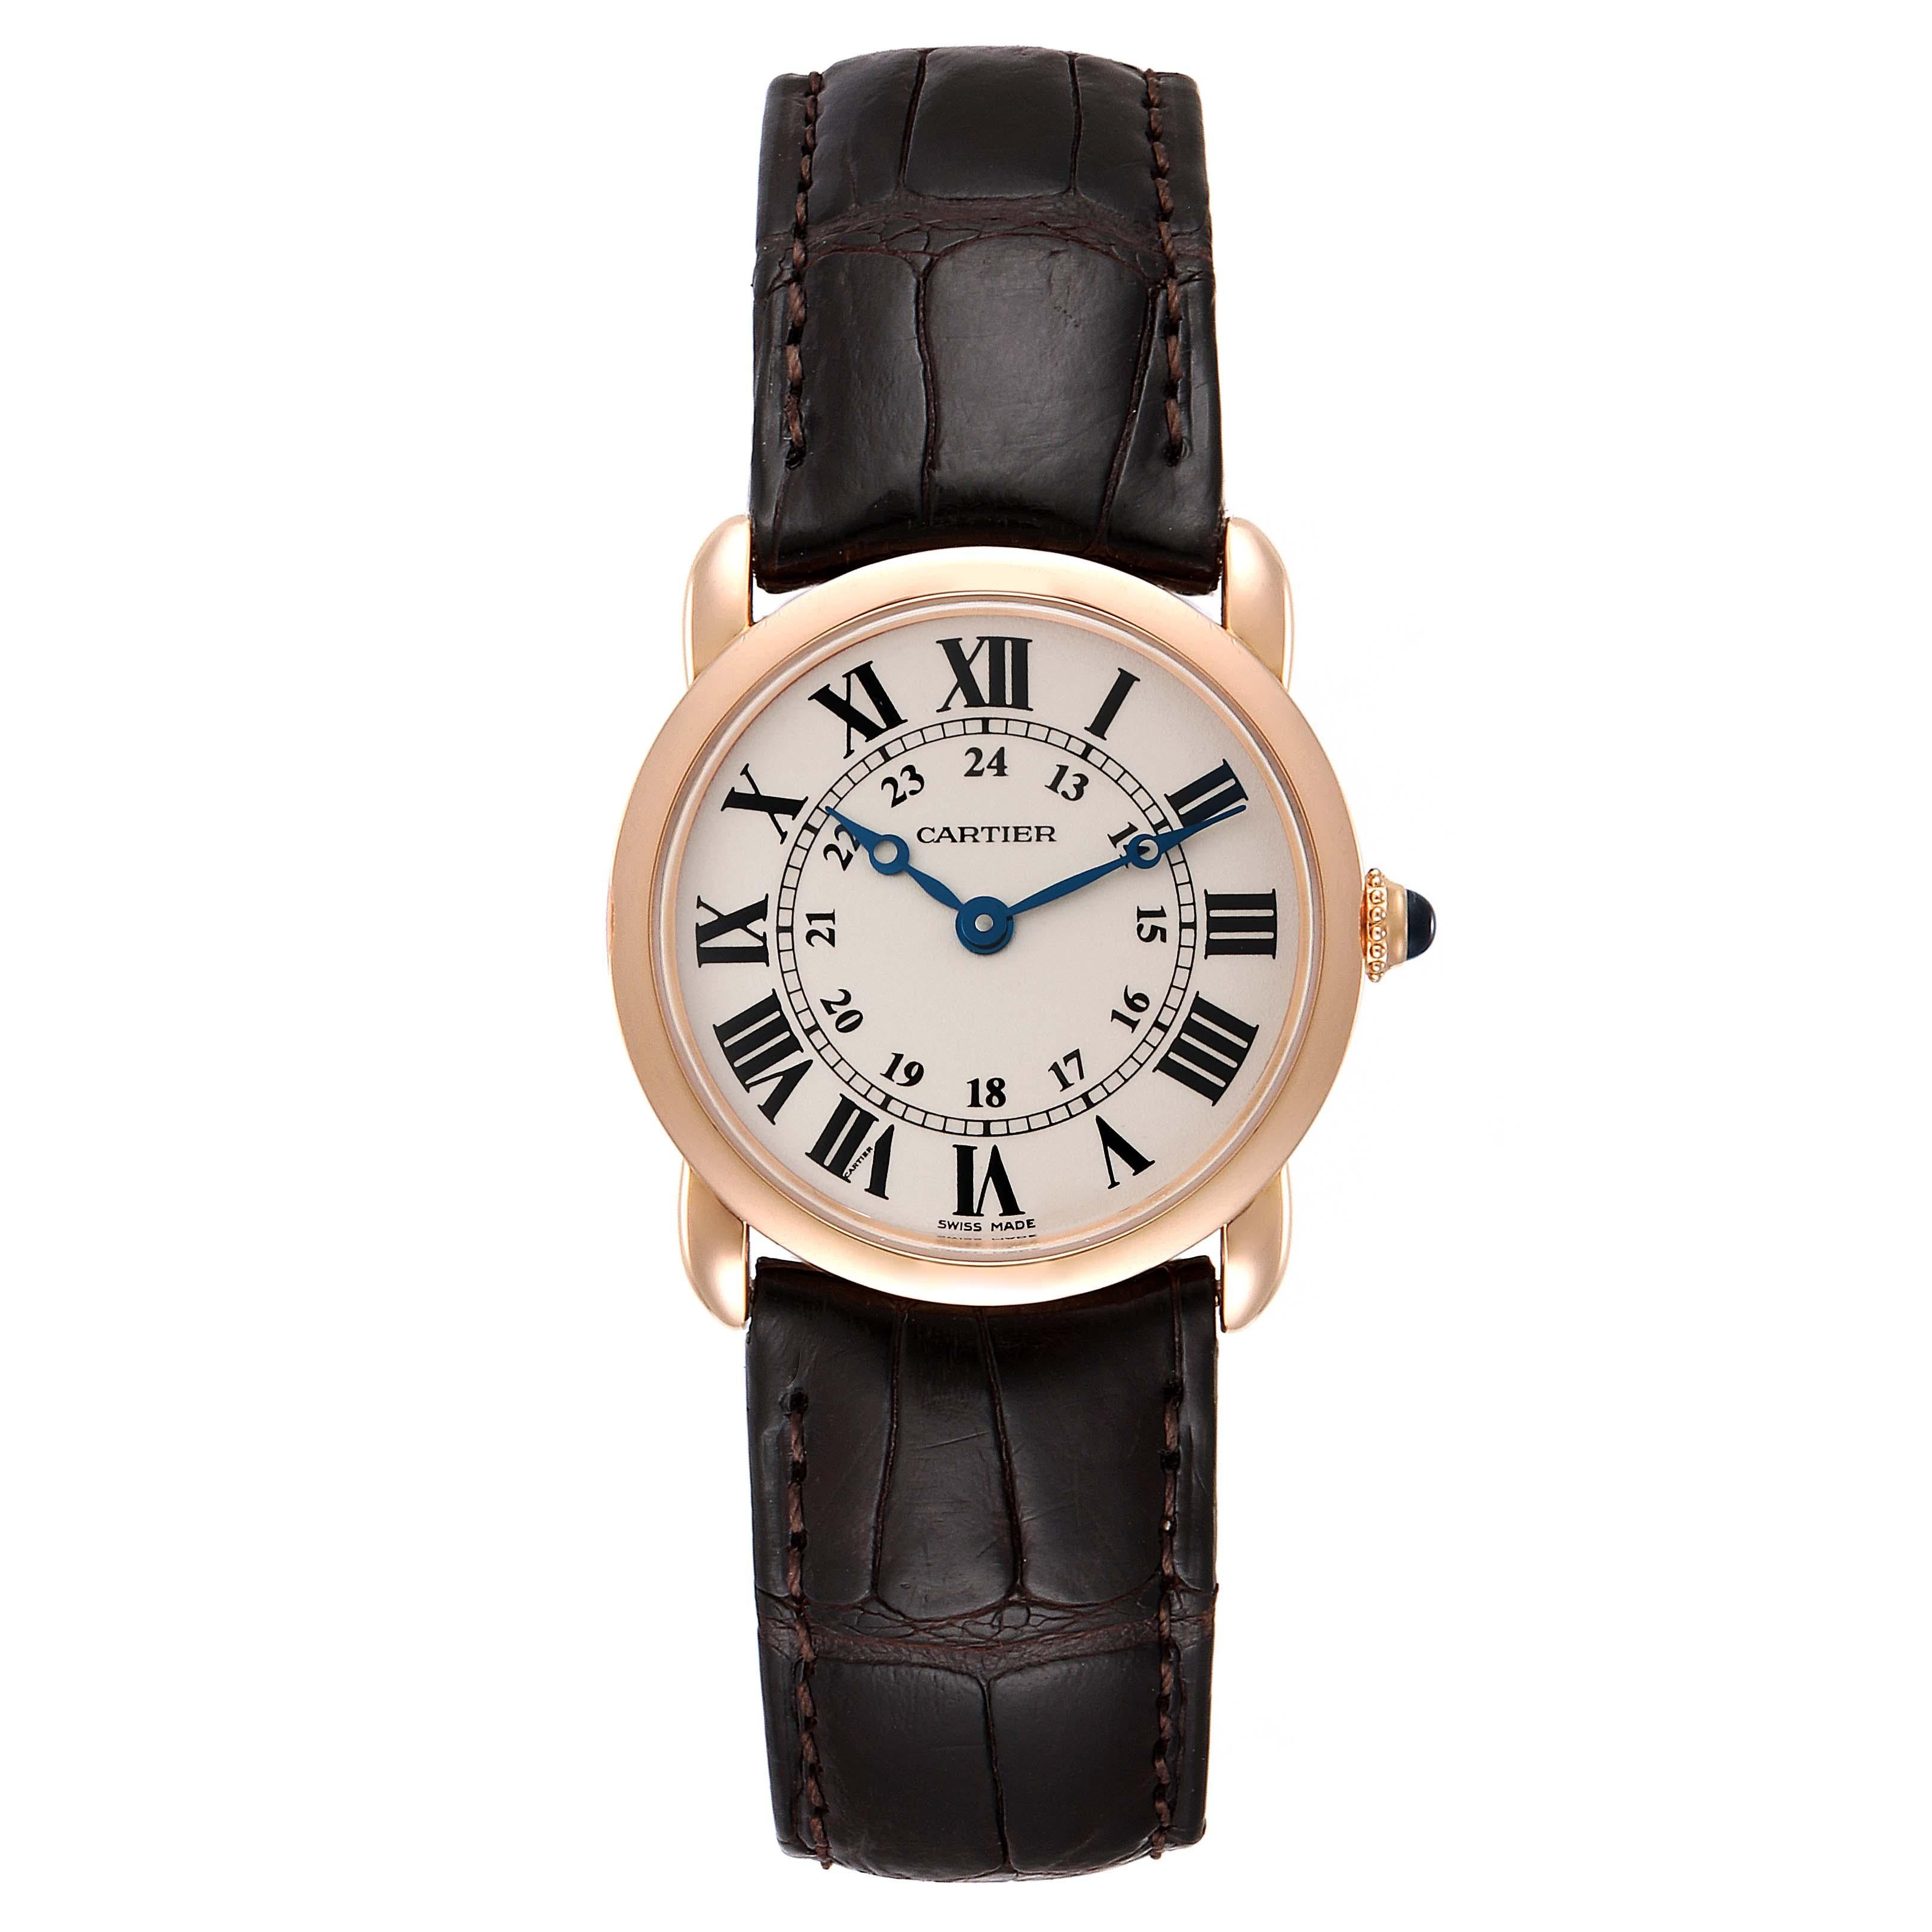 Cartier Ronde Louis Rose Gold Small Ladies Watch W6800151 Box Papers. Quartz movement. 18K rose gold case 29.0 mm in diameter. Case thikness 6.63 mm. Circular grained crown set with the blue sapphire cabochon. 18K rose gold bezel. Scratch resistant